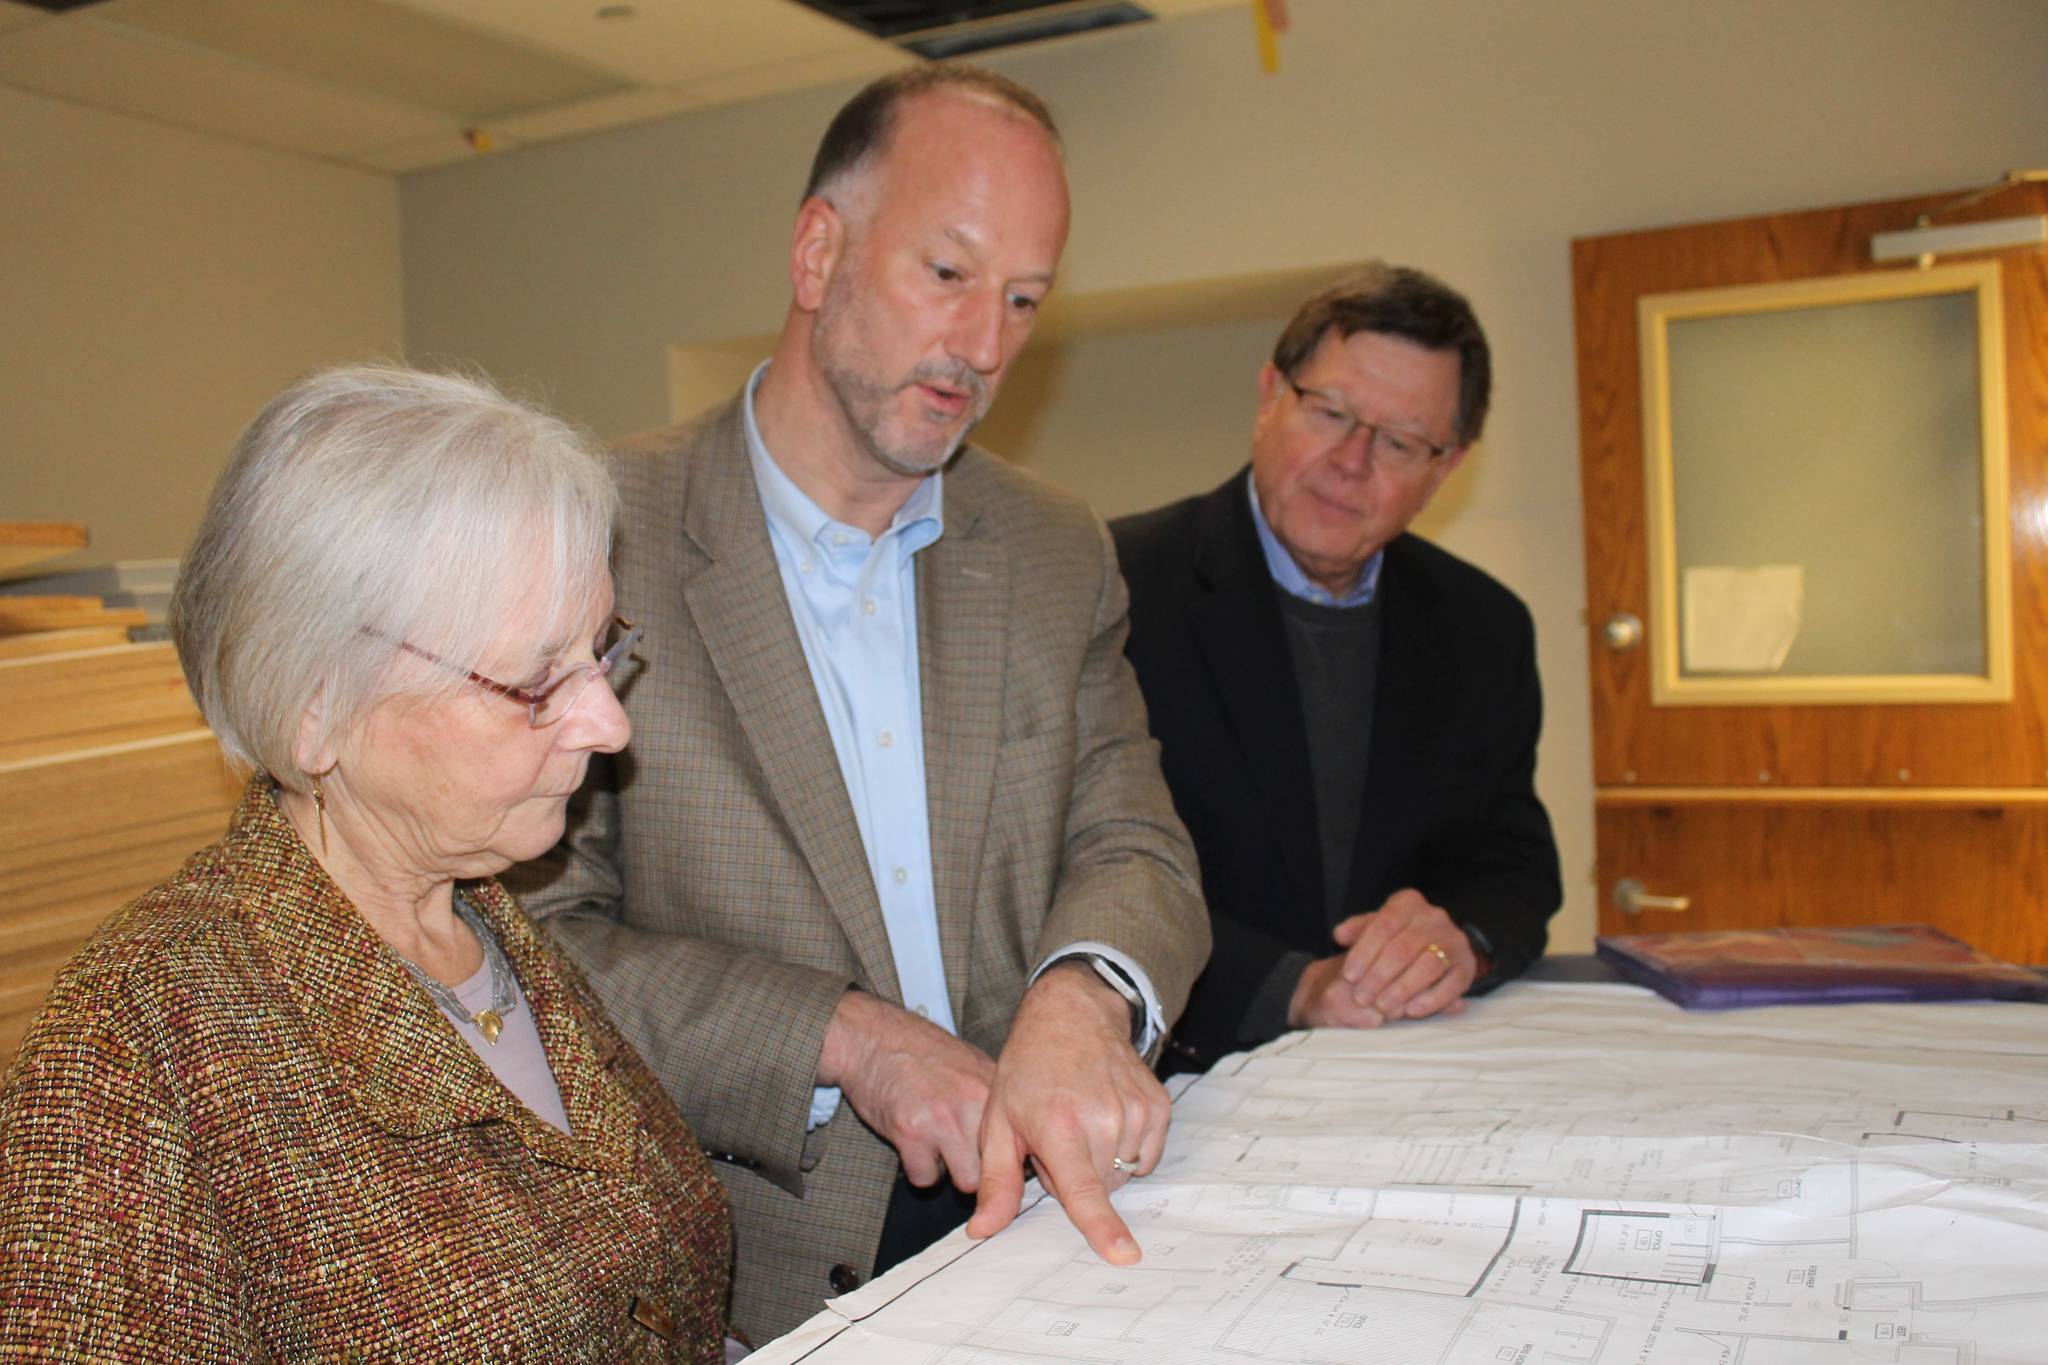 Kitsap County Commissioners Charlotte Garrido, Robert Gelder and Ed Wolfe met with constituents on Monday to discuss interim zoning regulations for LRA’s in Kitsap. File photo.